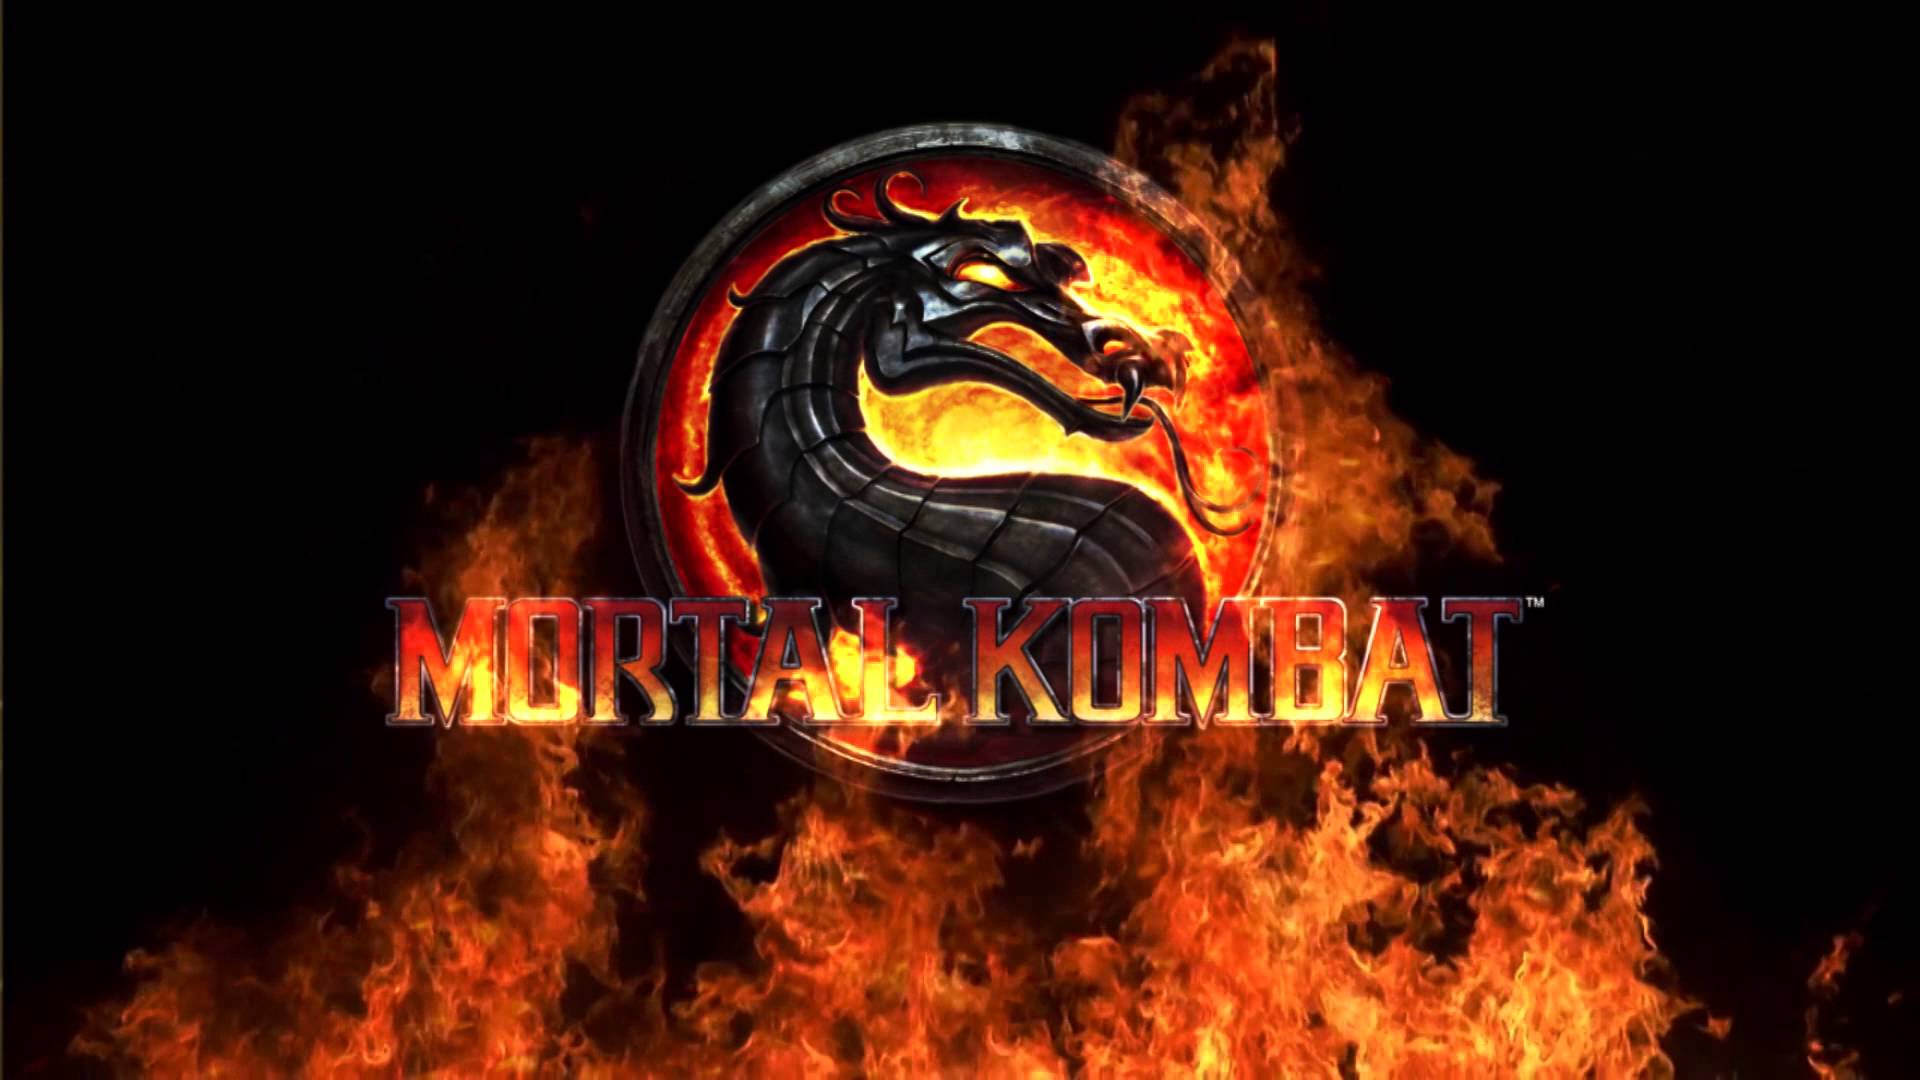 MK Dragon Logo - Did You Spot the 'Mortal Kombat' Easter Eggs in the 'Ready Player